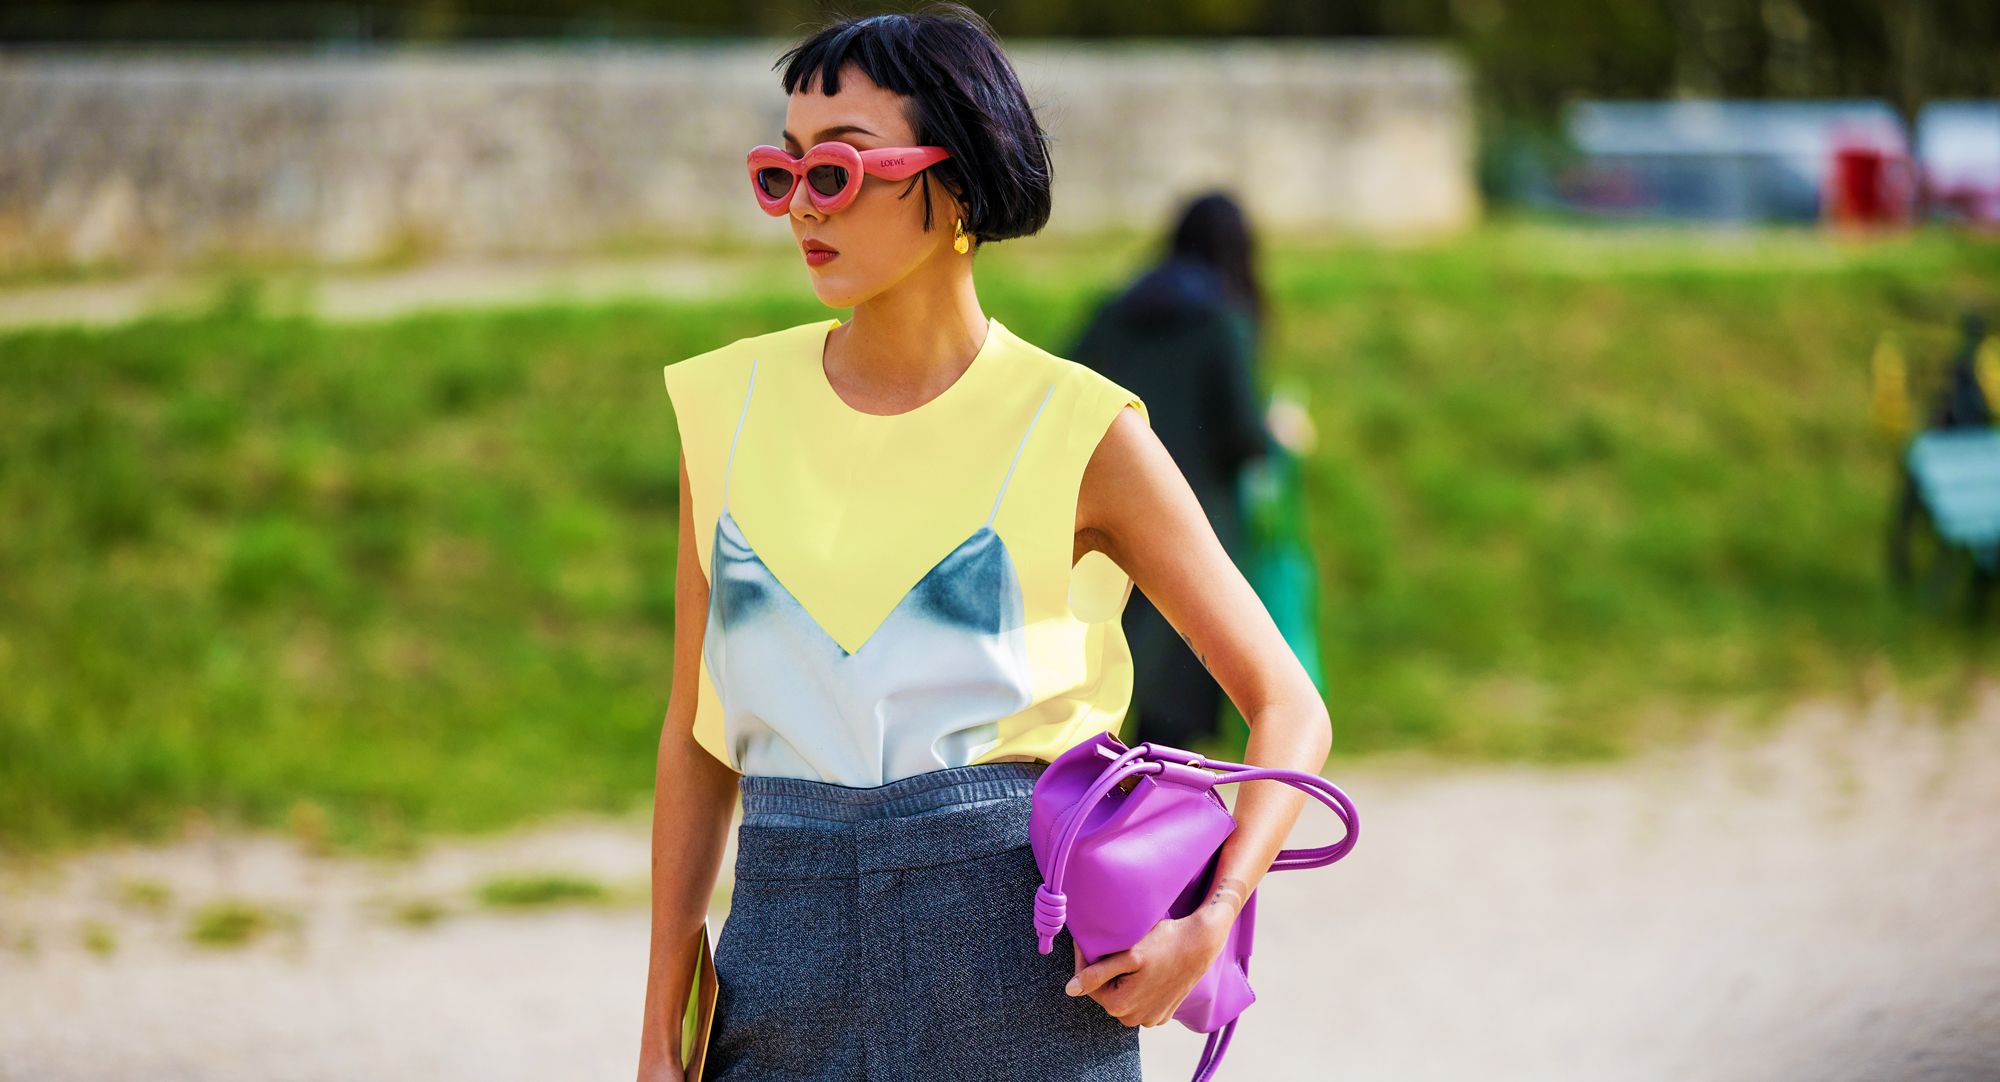 What to Wear in Spring? 10 Spring Outfits